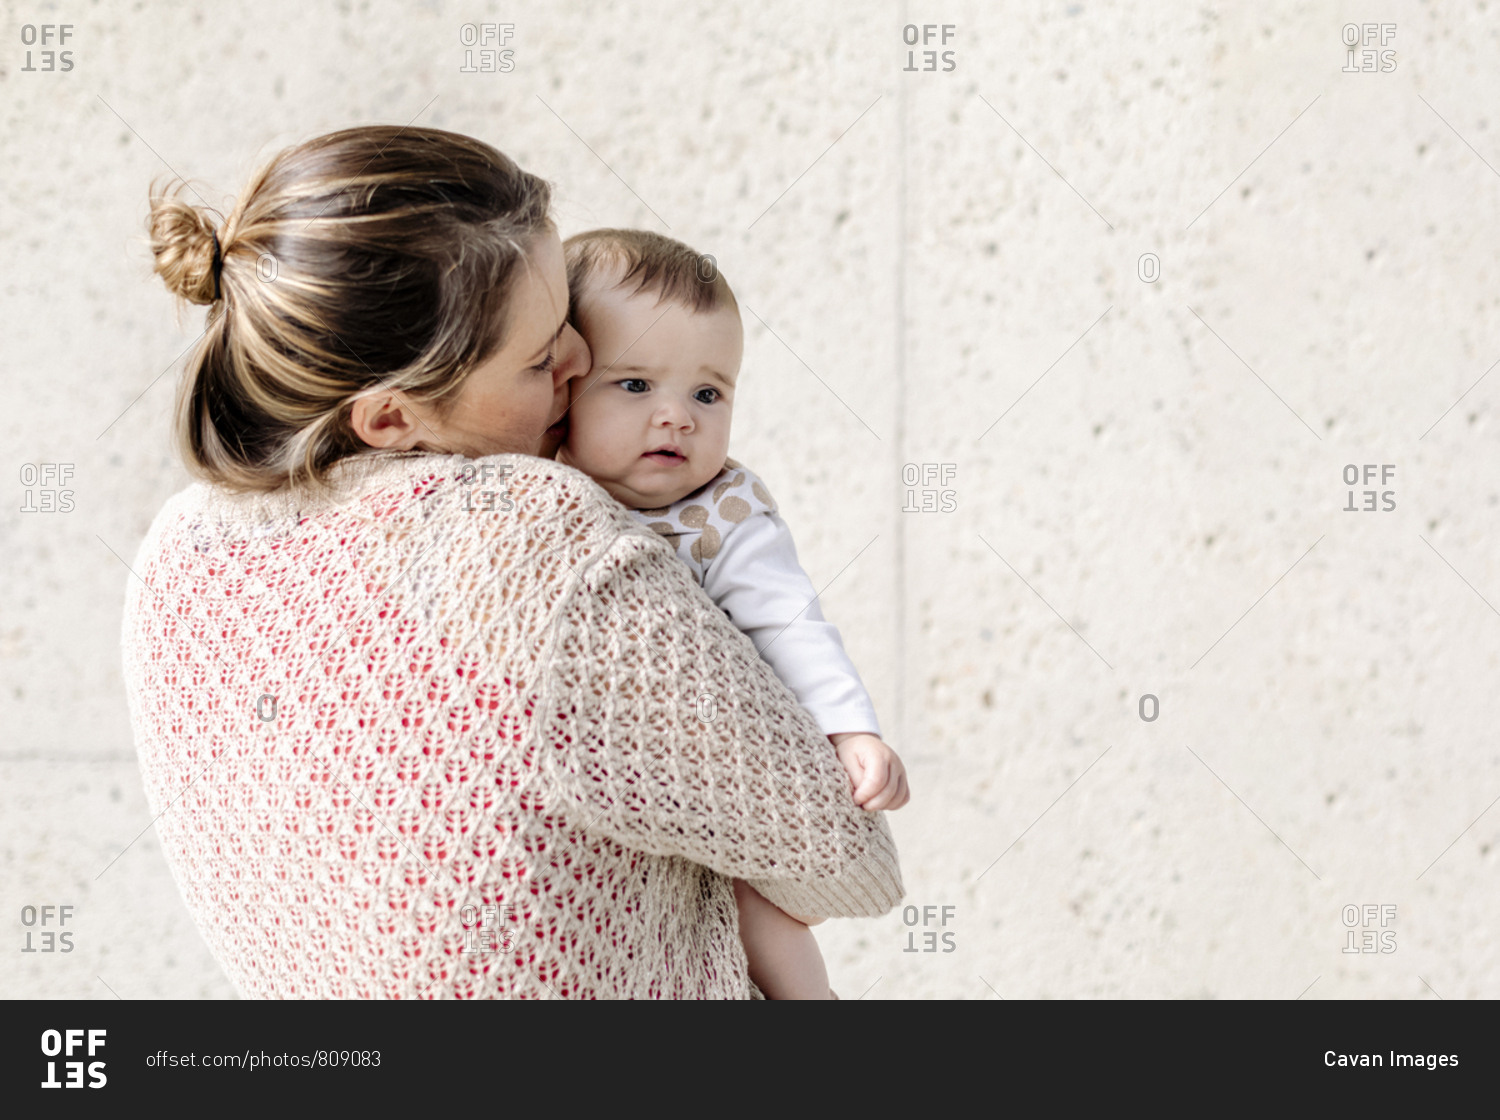 Mom holding and kissing baby who is waking up against concrete wall